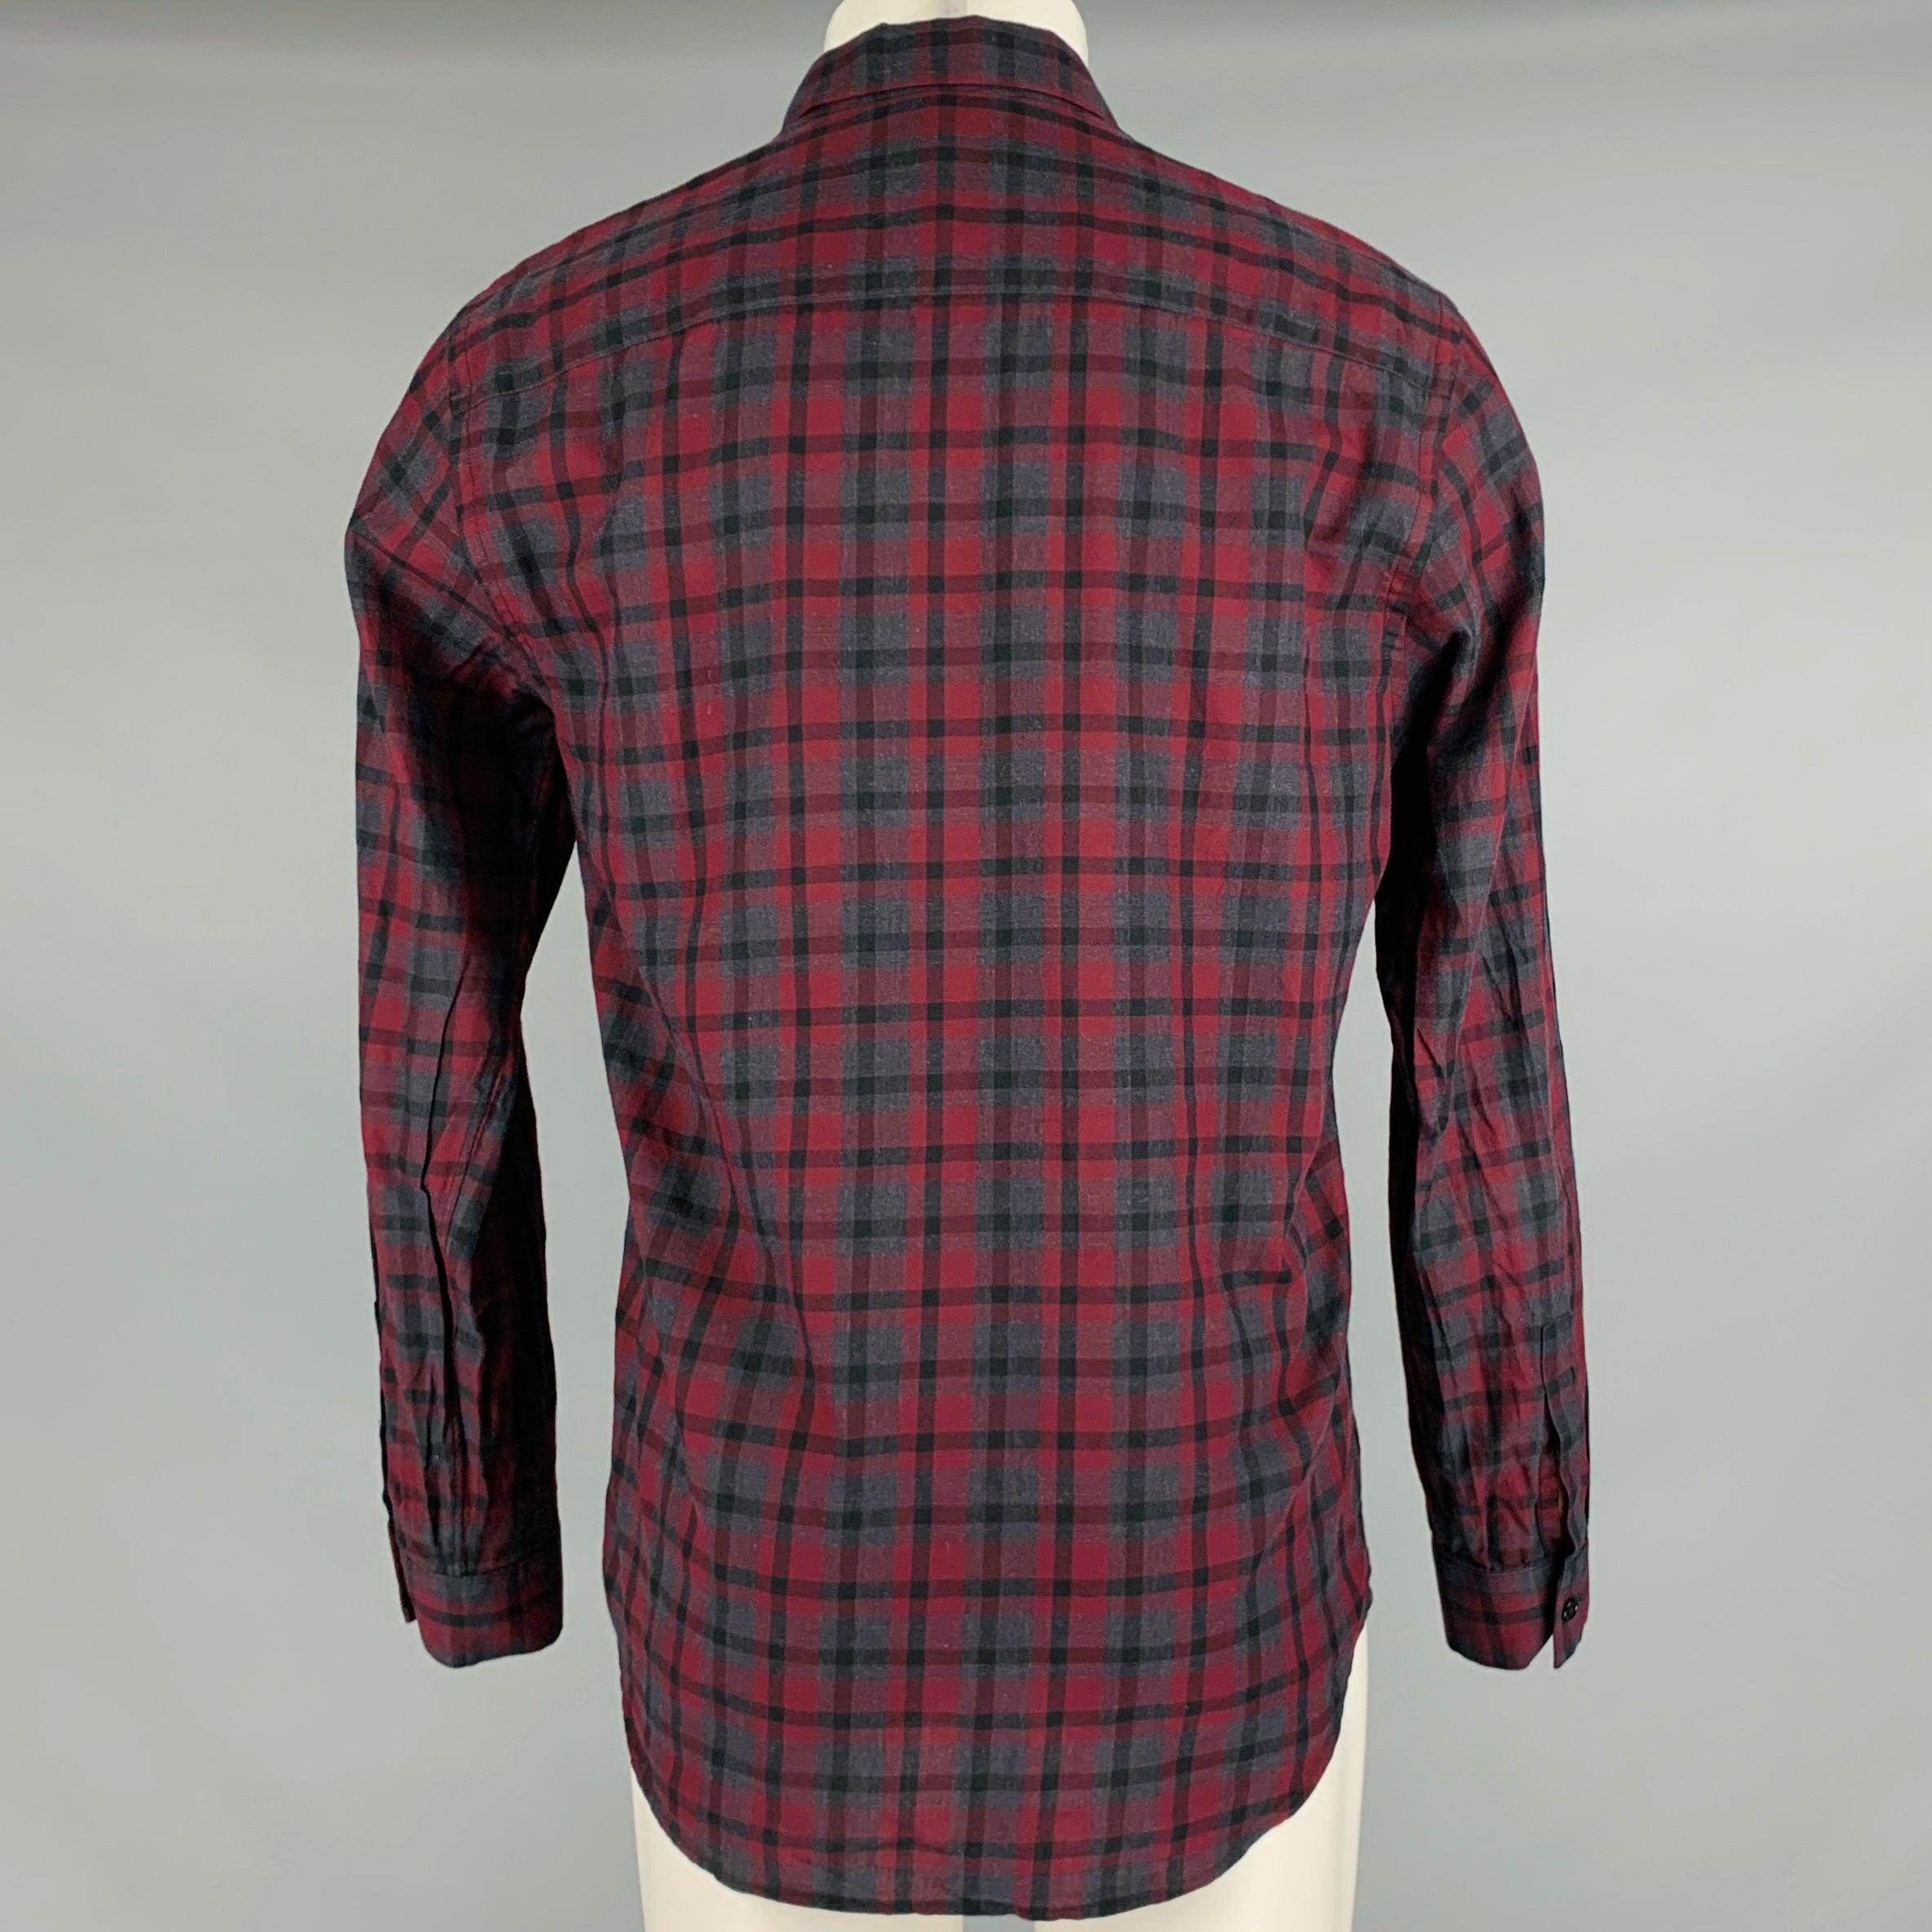 THEORY Size M Burgundy Charcoal Plaid Cotton Button Up Long Sleeve Shirt In Good Condition For Sale In San Francisco, CA